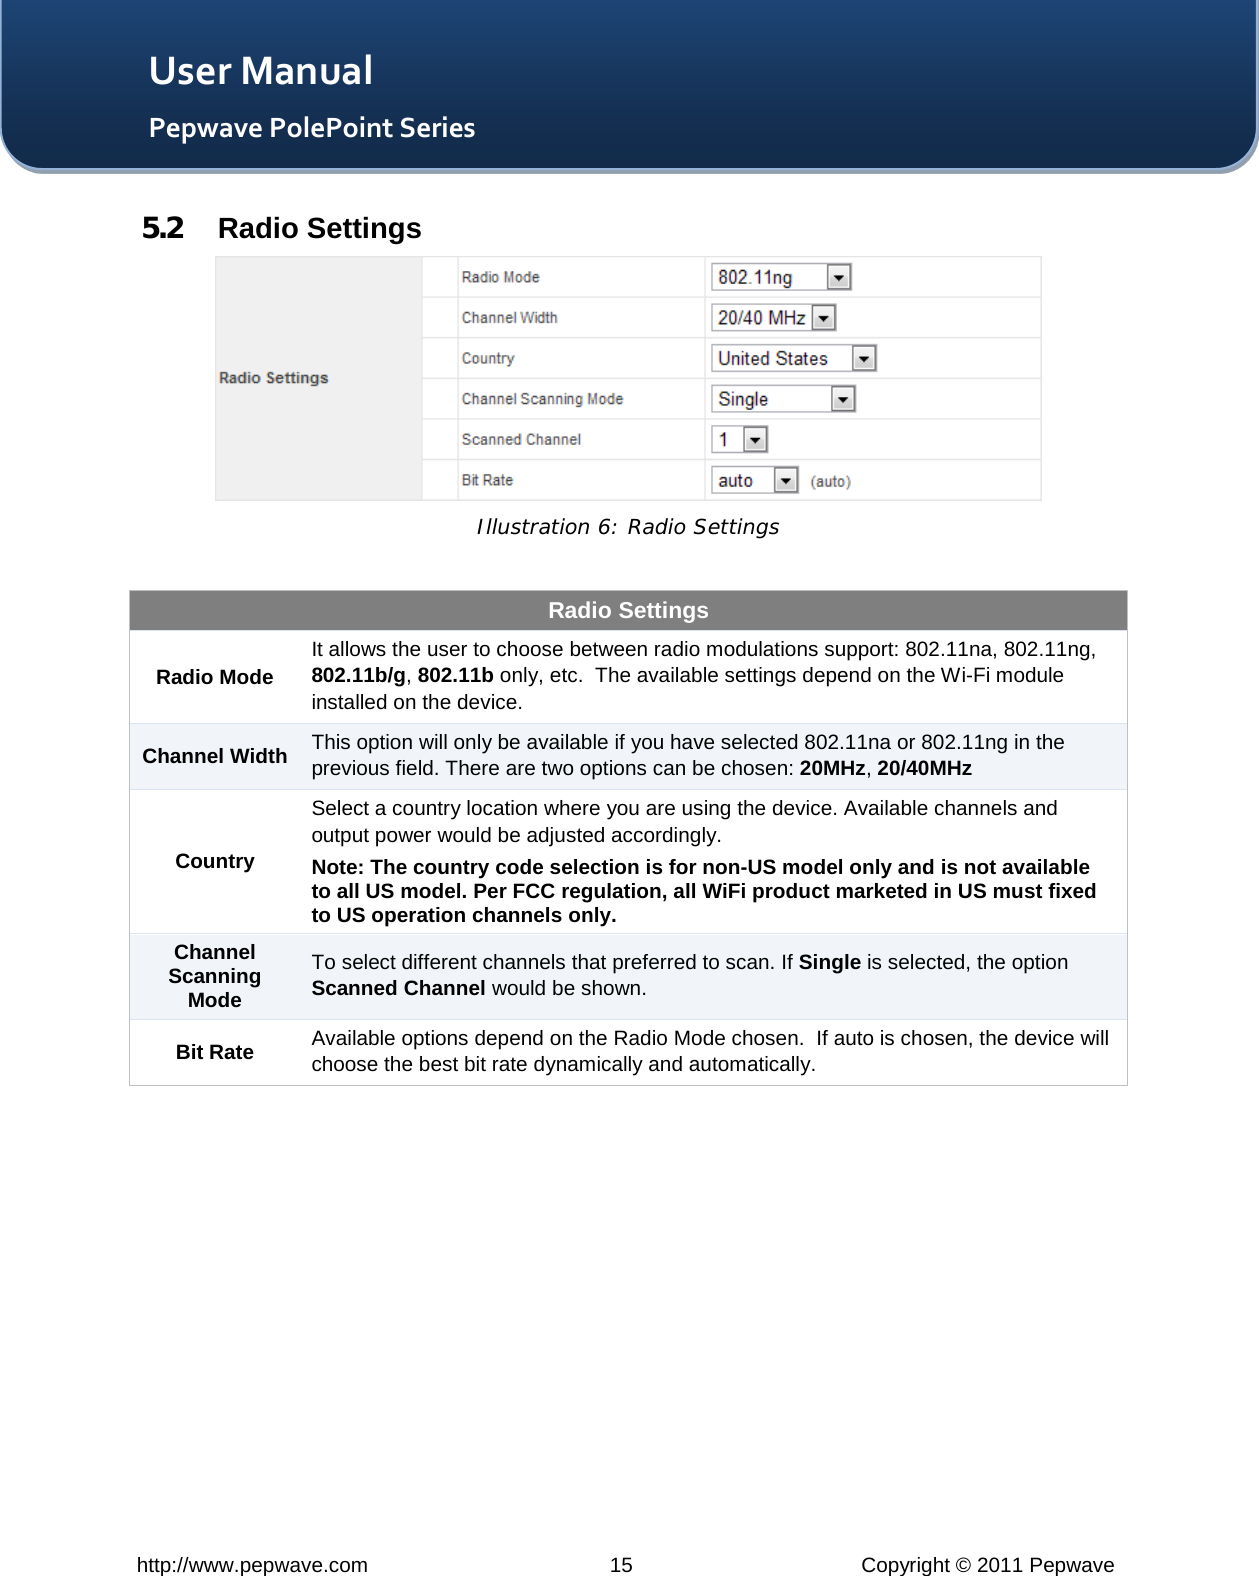   http://www.pepwave.com 15 Copyright © 2011 Pepwave   User Manual Pepwave PolePoint Series 5.2 Radio Settings  Illustration 6: Radio Settings  Radio Settings Radio Mode It allows the user to choose between radio modulations support: 802.11na, 802.11ng, 802.11b/g, 802.11b only, etc.  The available settings depend on the Wi-Fi module installed on the device. Channel Width This option will only be available if you have selected 802.11na or 802.11ng in the previous field. There are two options can be chosen: 20MHz, 20/40MHz Country Select a country location where you are using the device. Available channels and output power would be adjusted accordingly. Note: The country code selection is for non-US model only and is not available to all US model. Per FCC regulation, all WiFi product marketed in US must fixed to US operation channels only. Channel Scanning Mode To select different channels that preferred to scan. If Single is selected, the option Scanned Channel would be shown. Bit Rate Available options depend on the Radio Mode chosen.  If auto is chosen, the device will choose the best bit rate dynamically and automatically.  